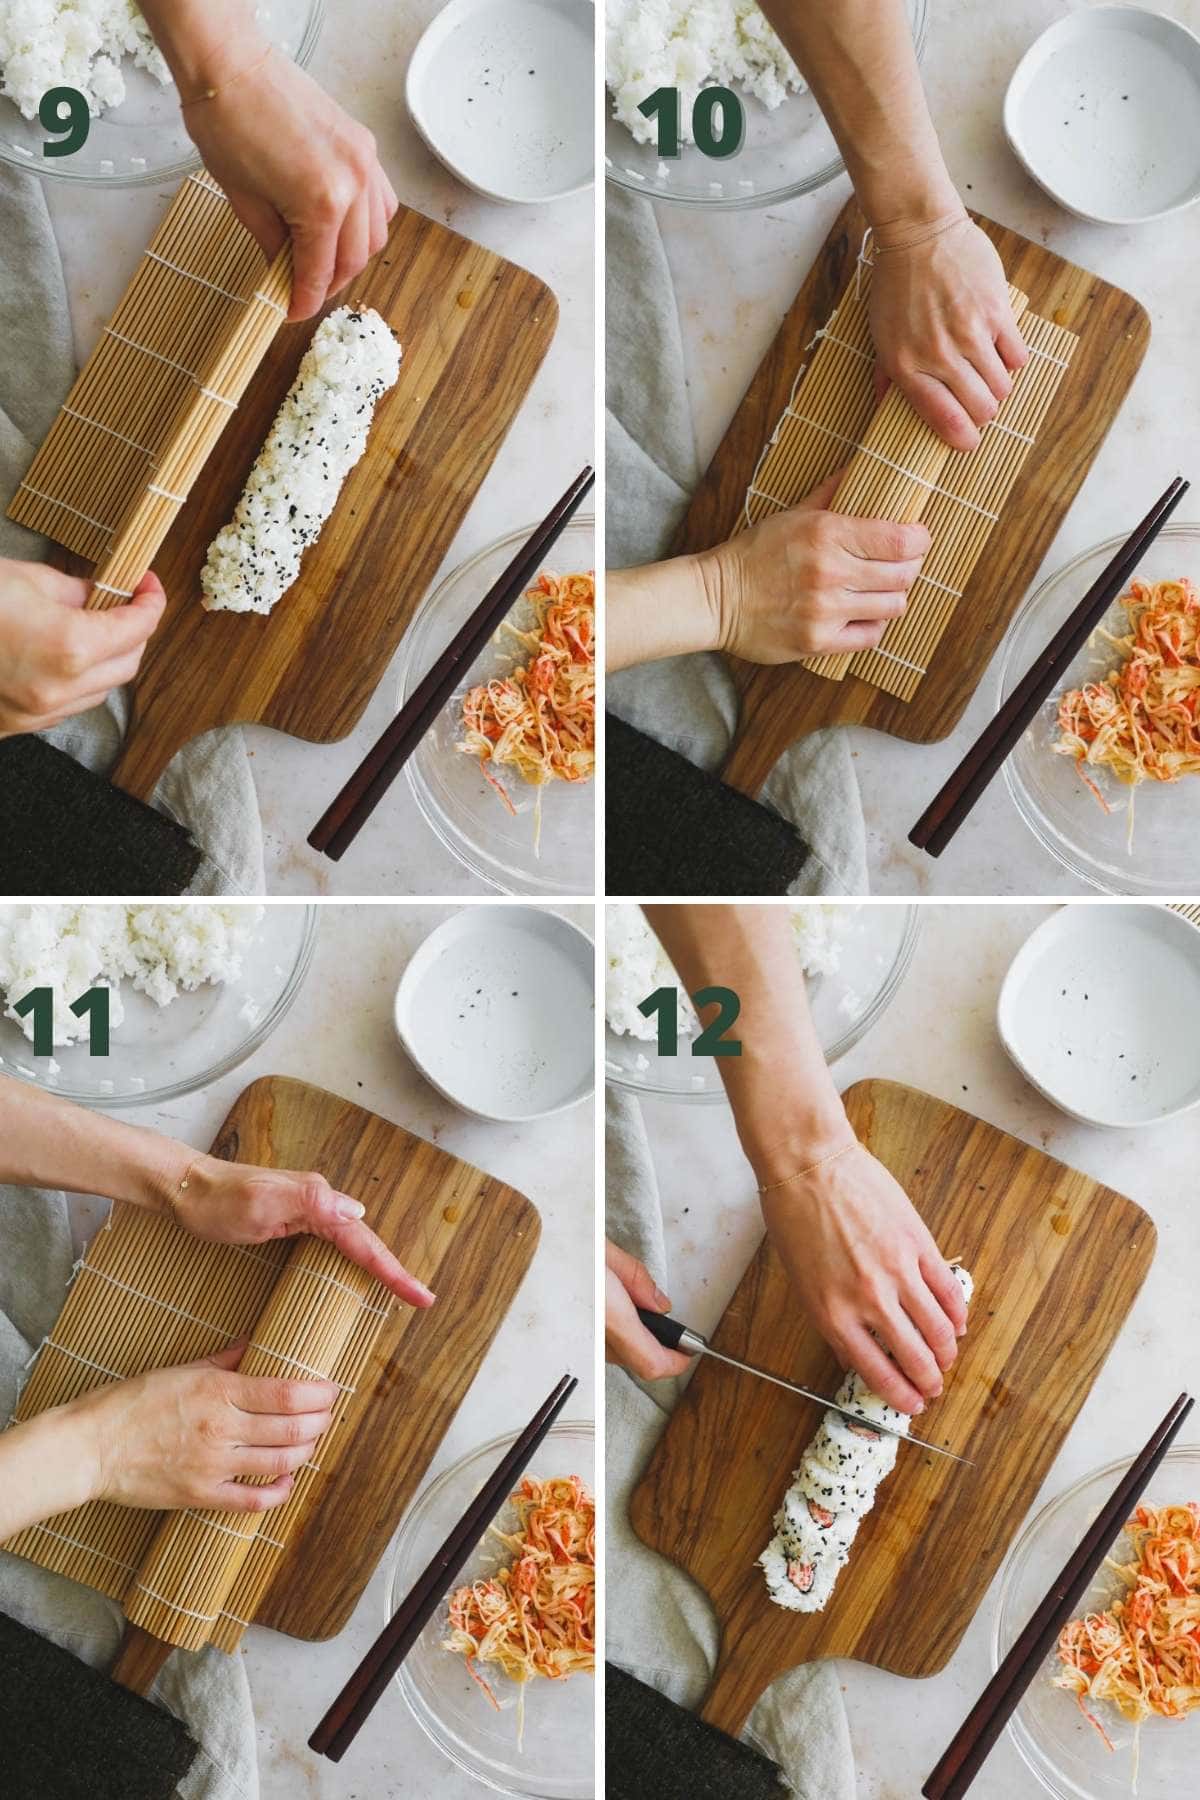 Easy steps to make spicy kani roll, including forming the roll with a bamboo sushi mat and slicing with a knife.